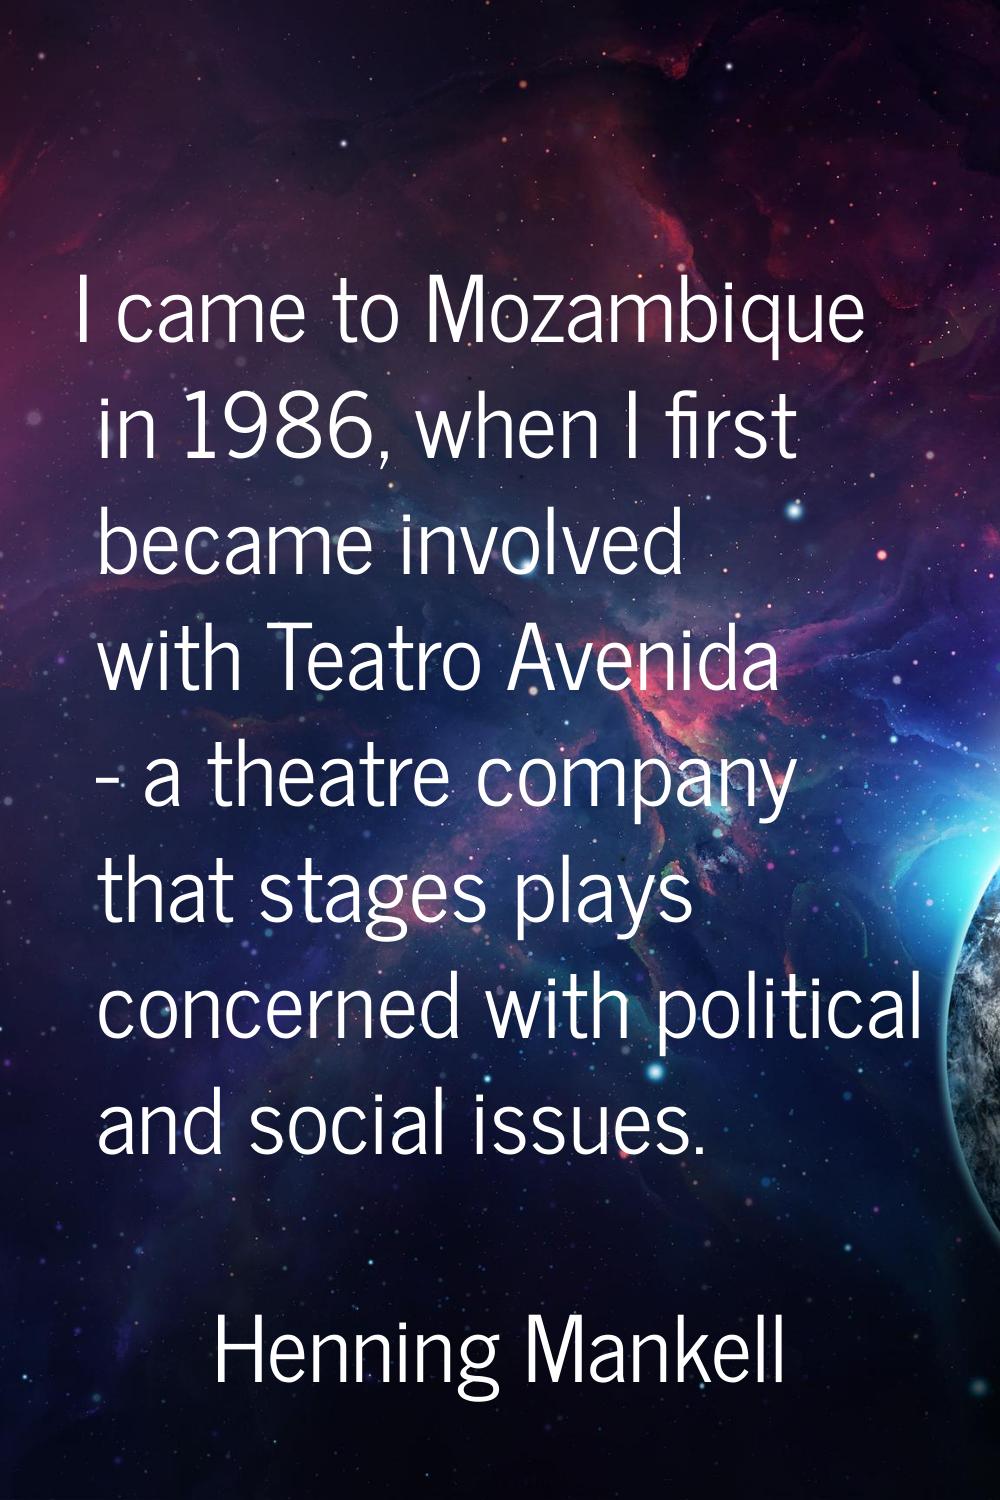 I came to Mozambique in 1986, when I first became involved with Teatro Avenida - a theatre company 